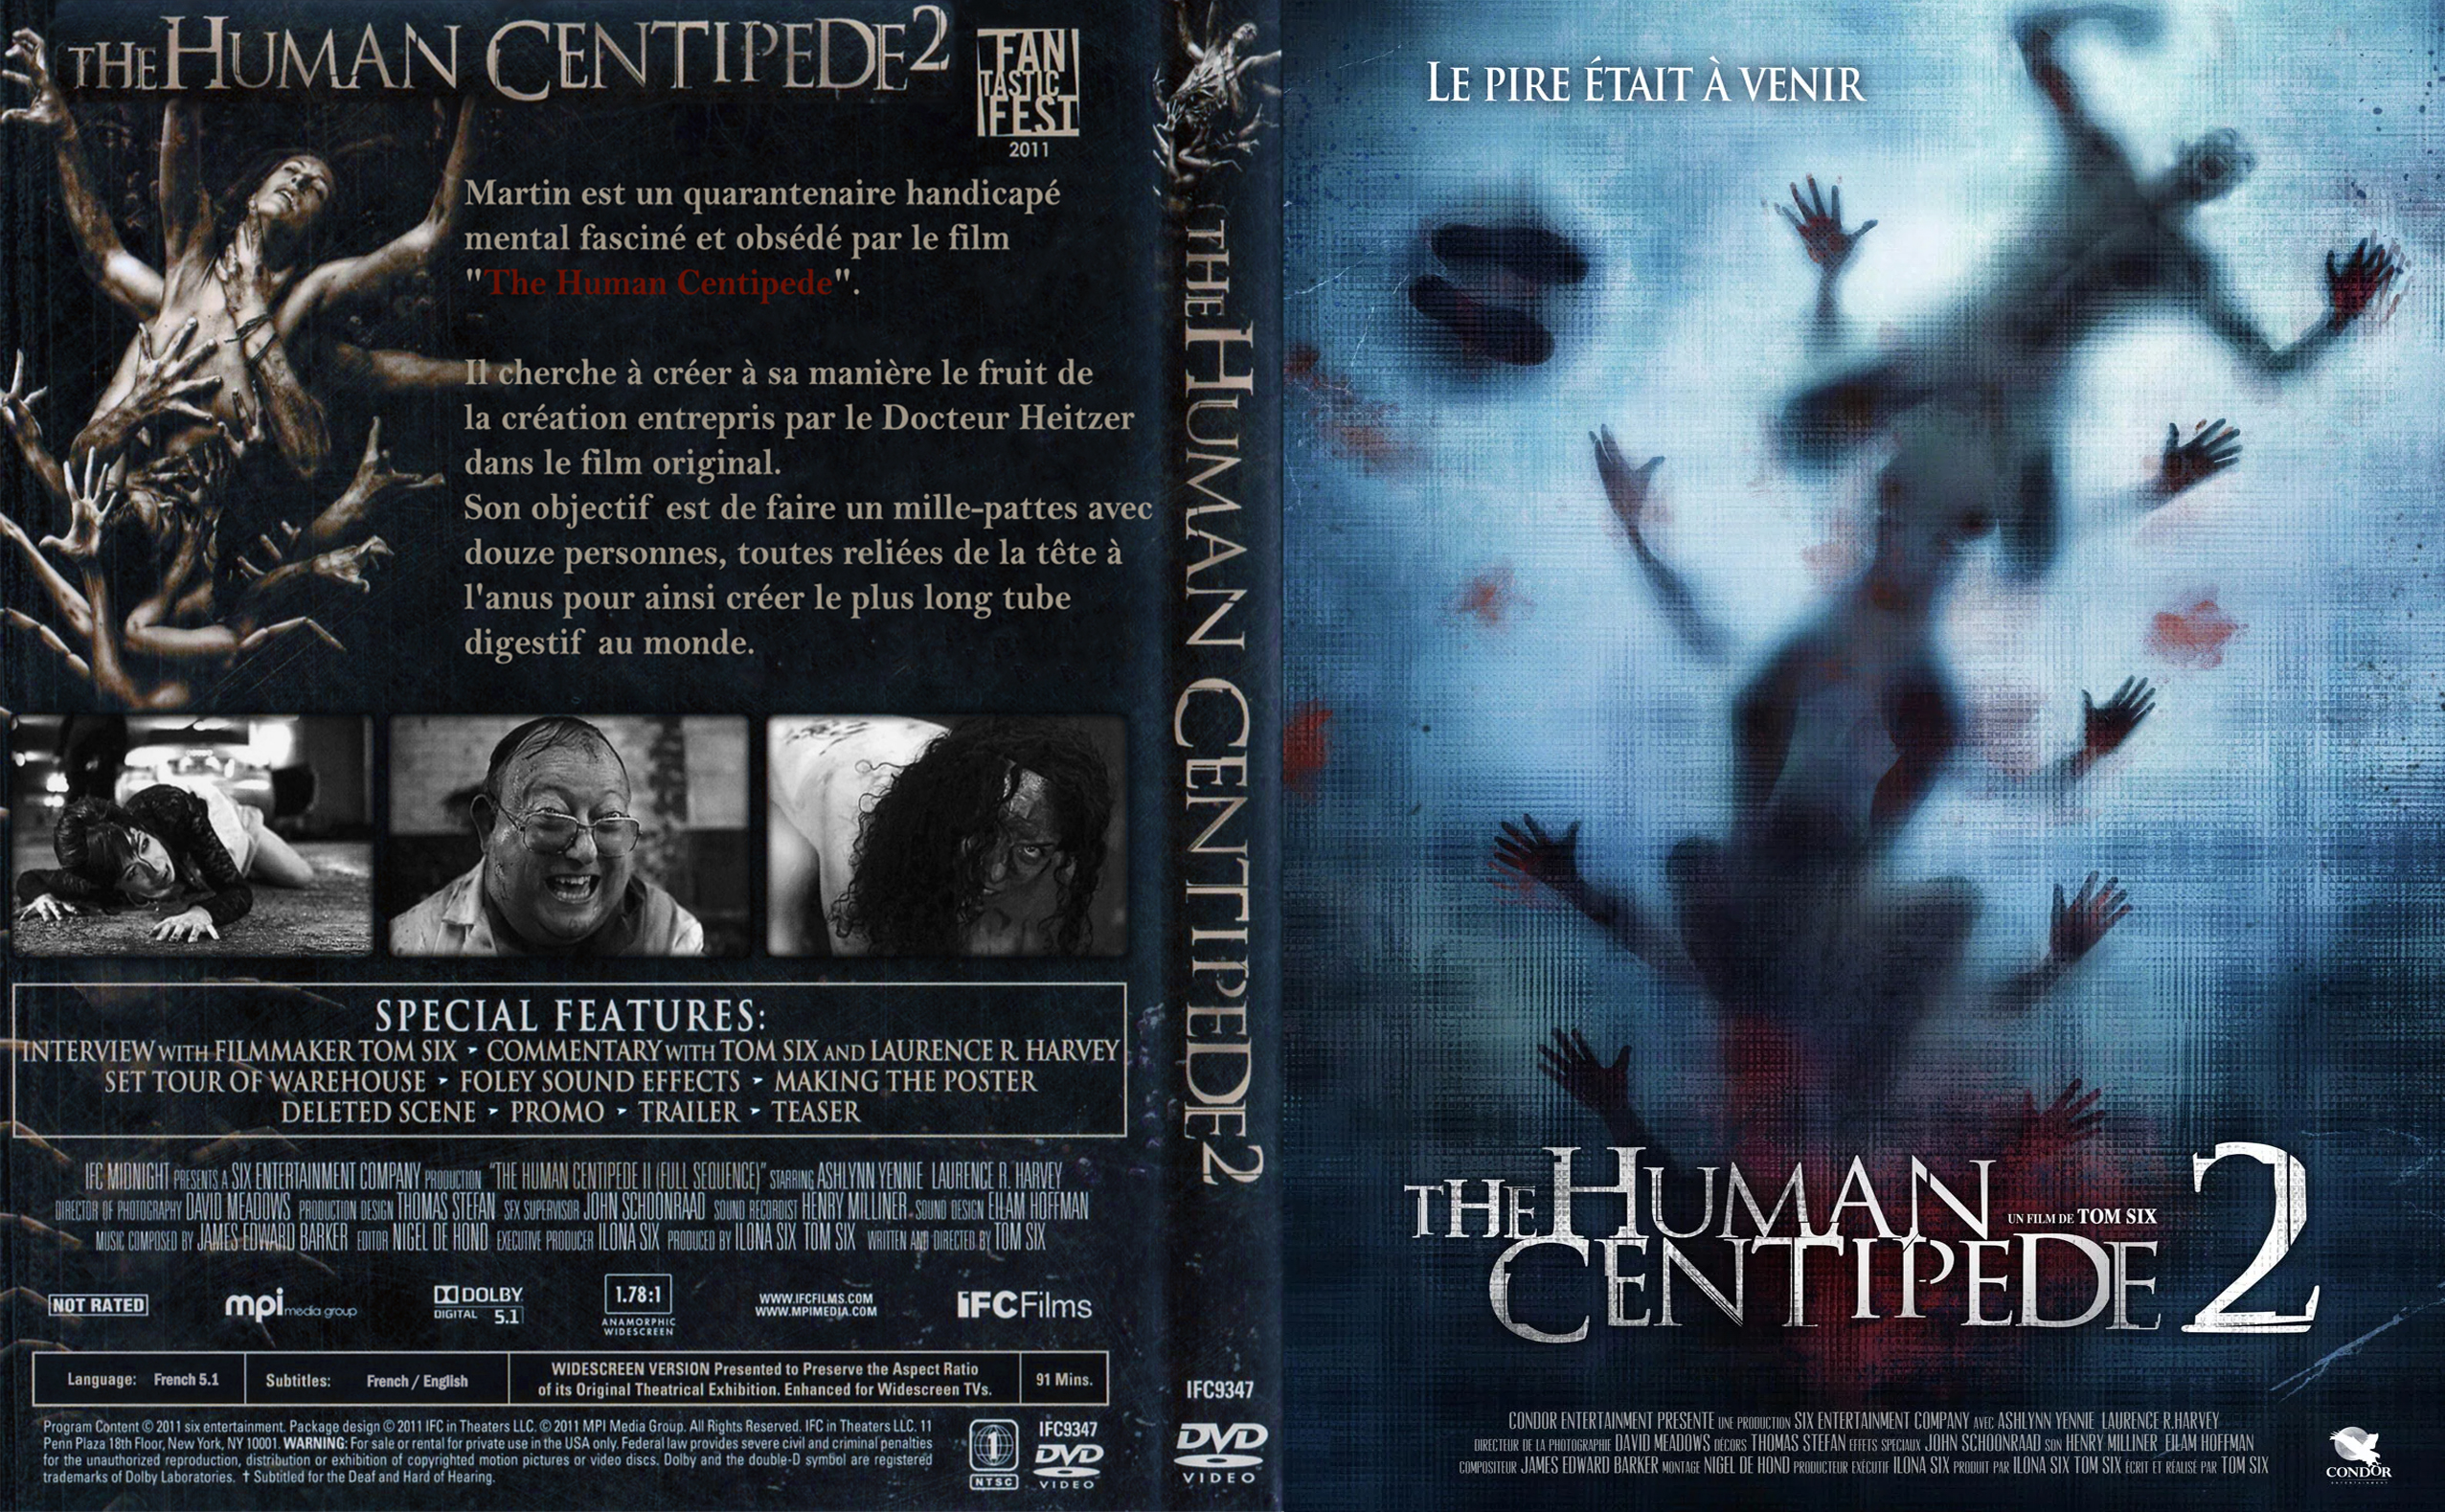 Jaquette DVD The Human Centipede 2